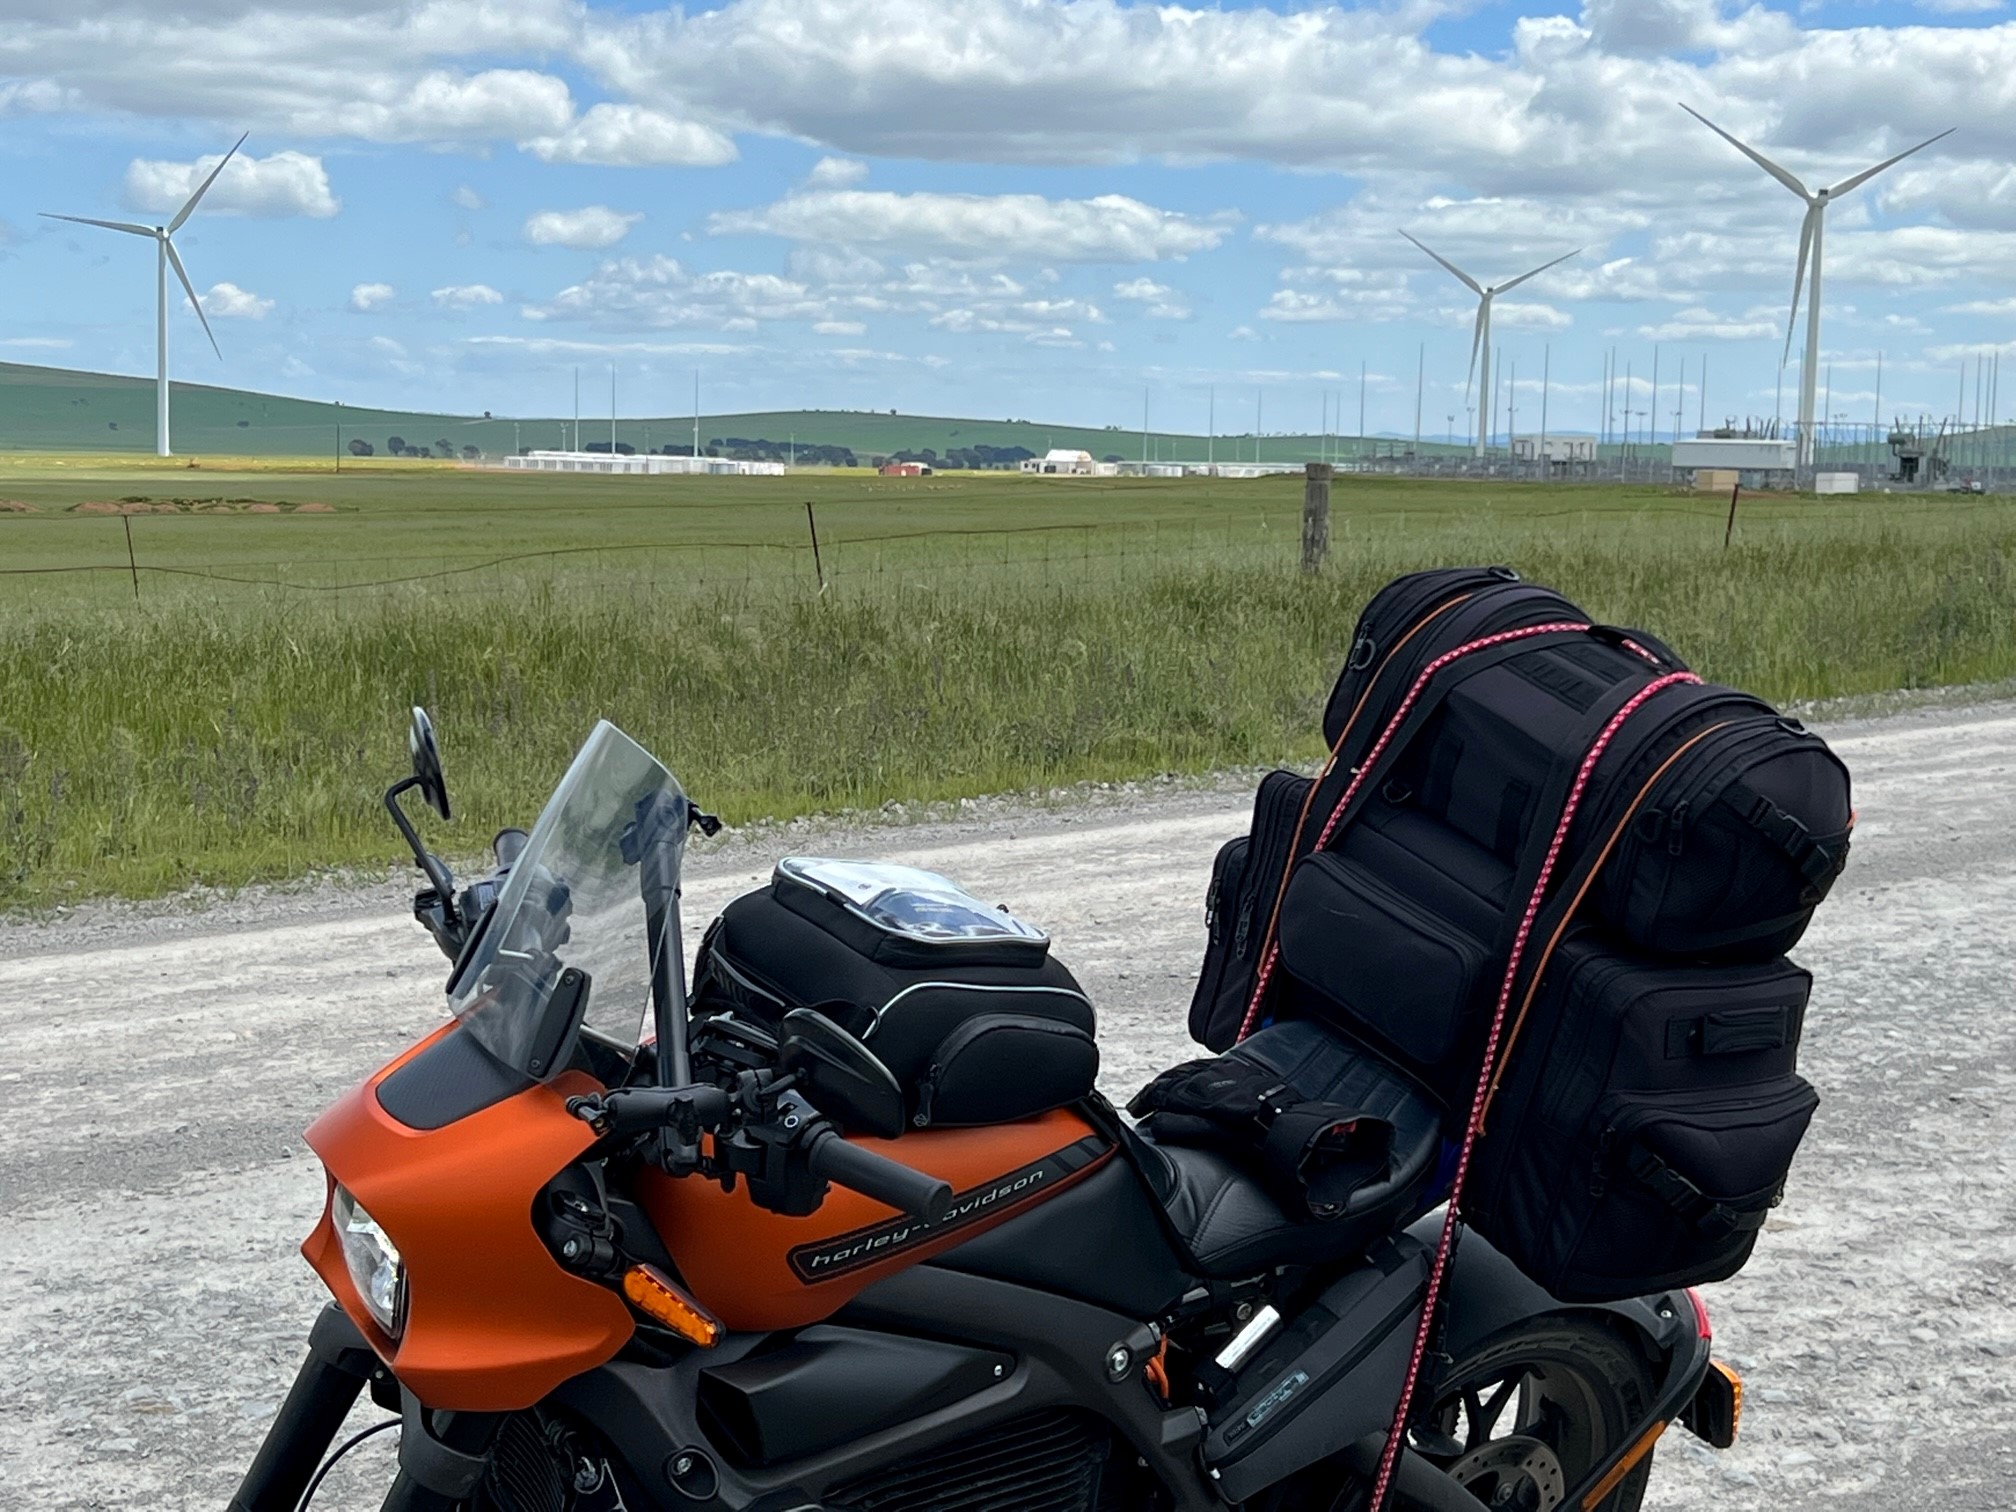 Ed's orange and black Harley parked near a wind farm in South Australia 